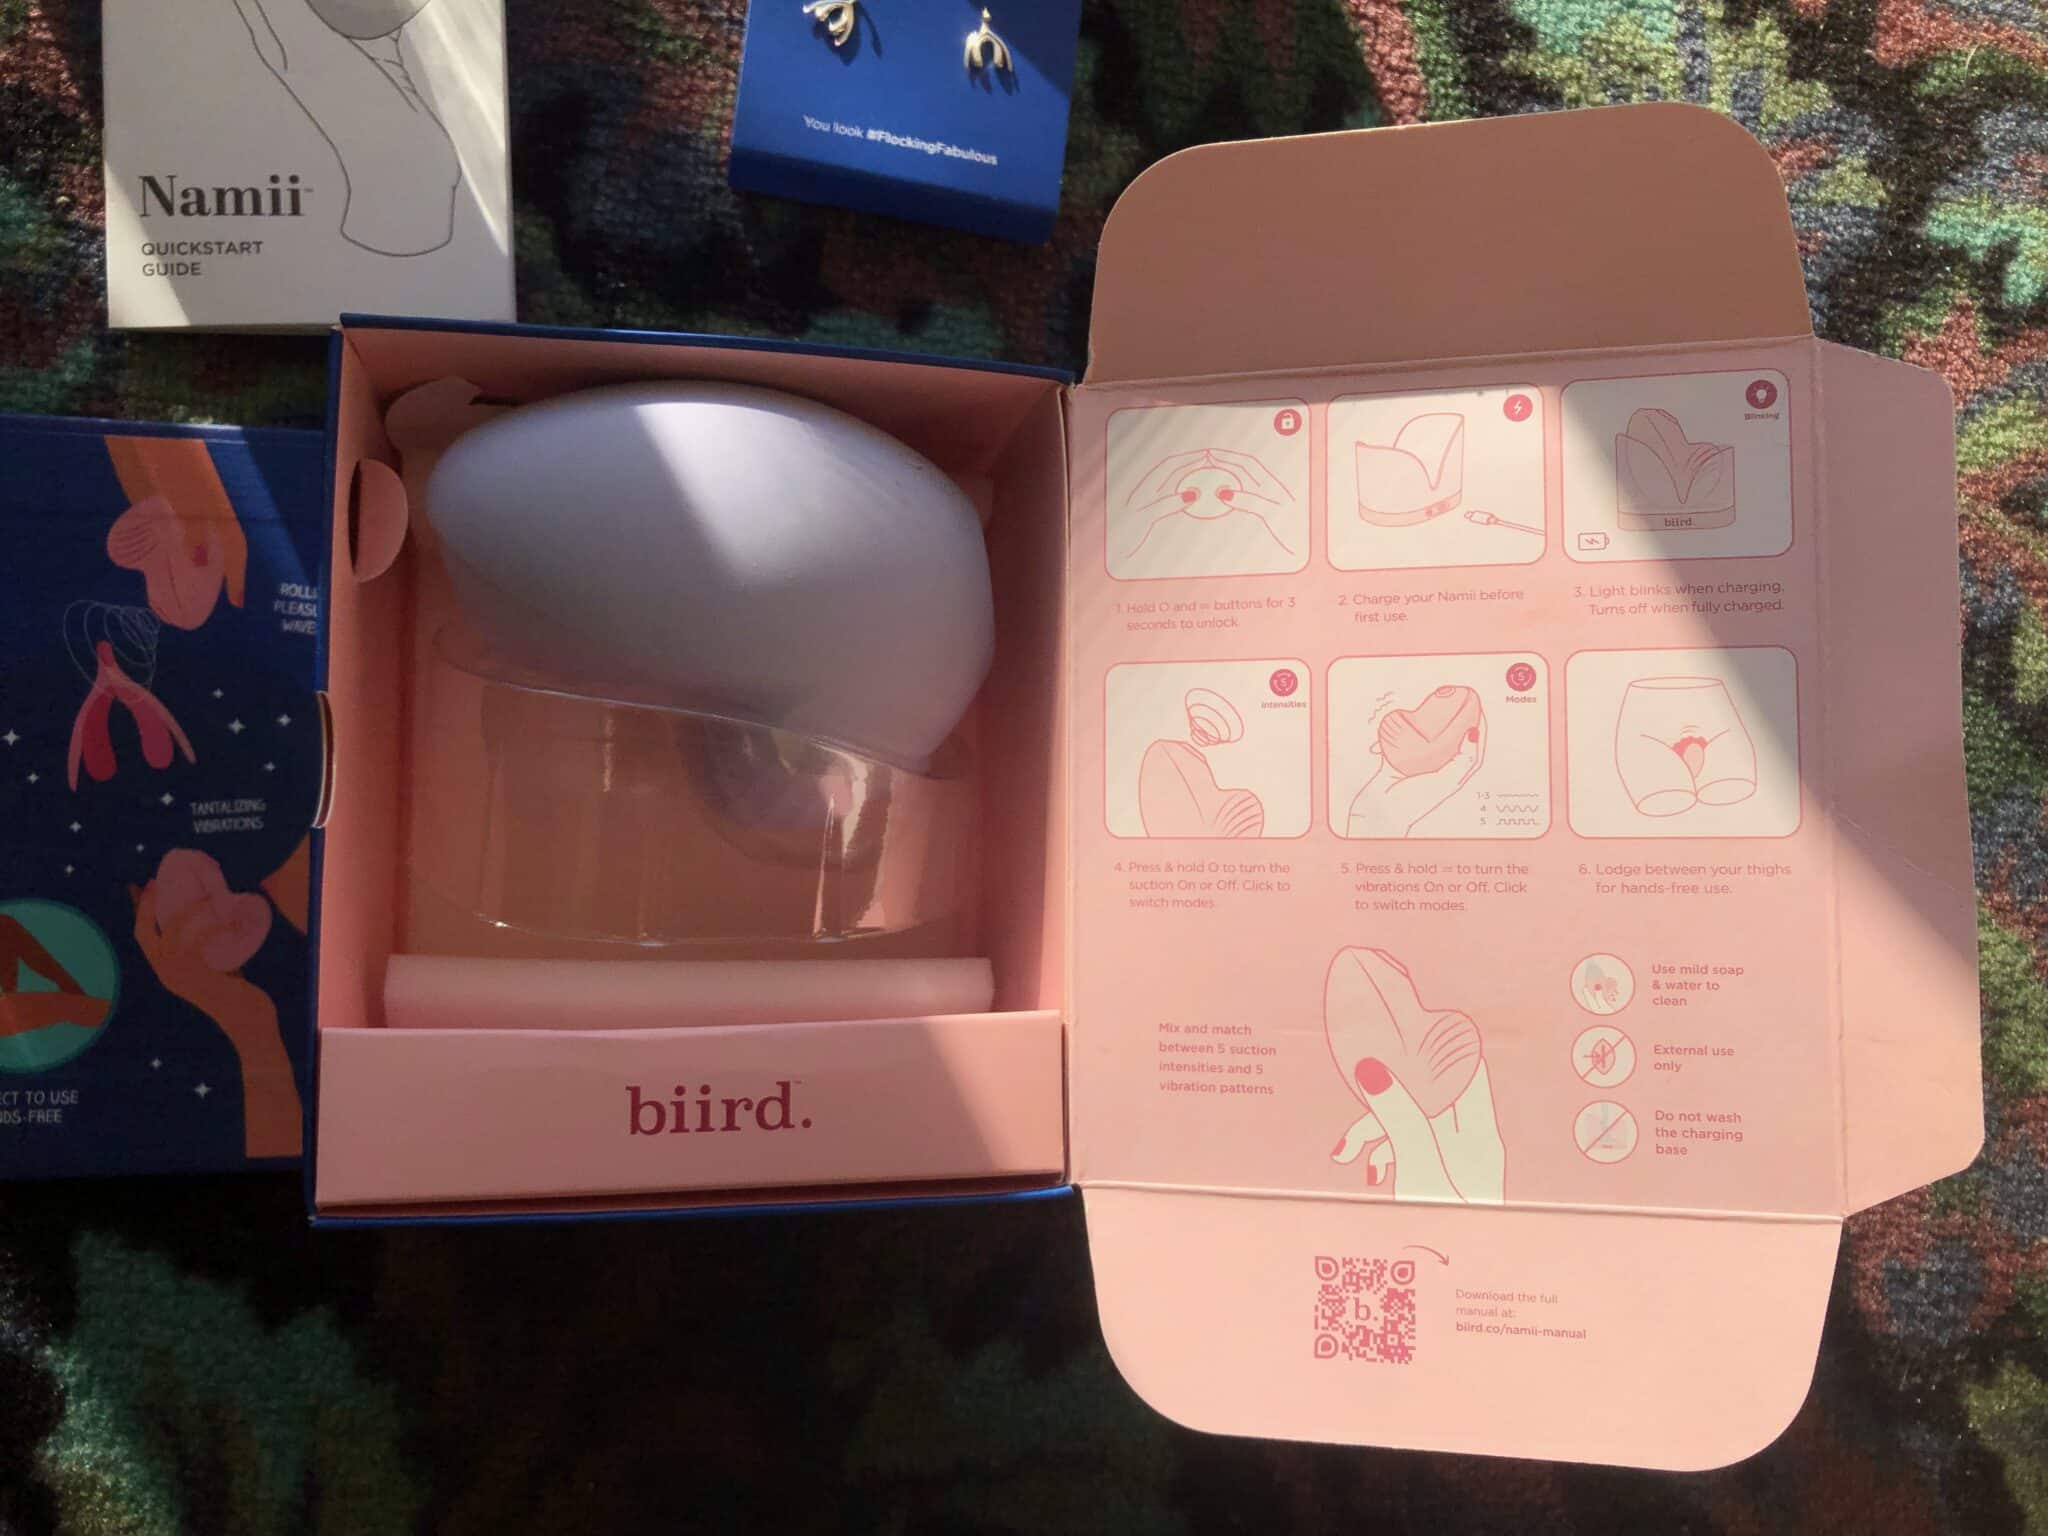 Biird Namii Unwrapping Excitement: A Packaging Review